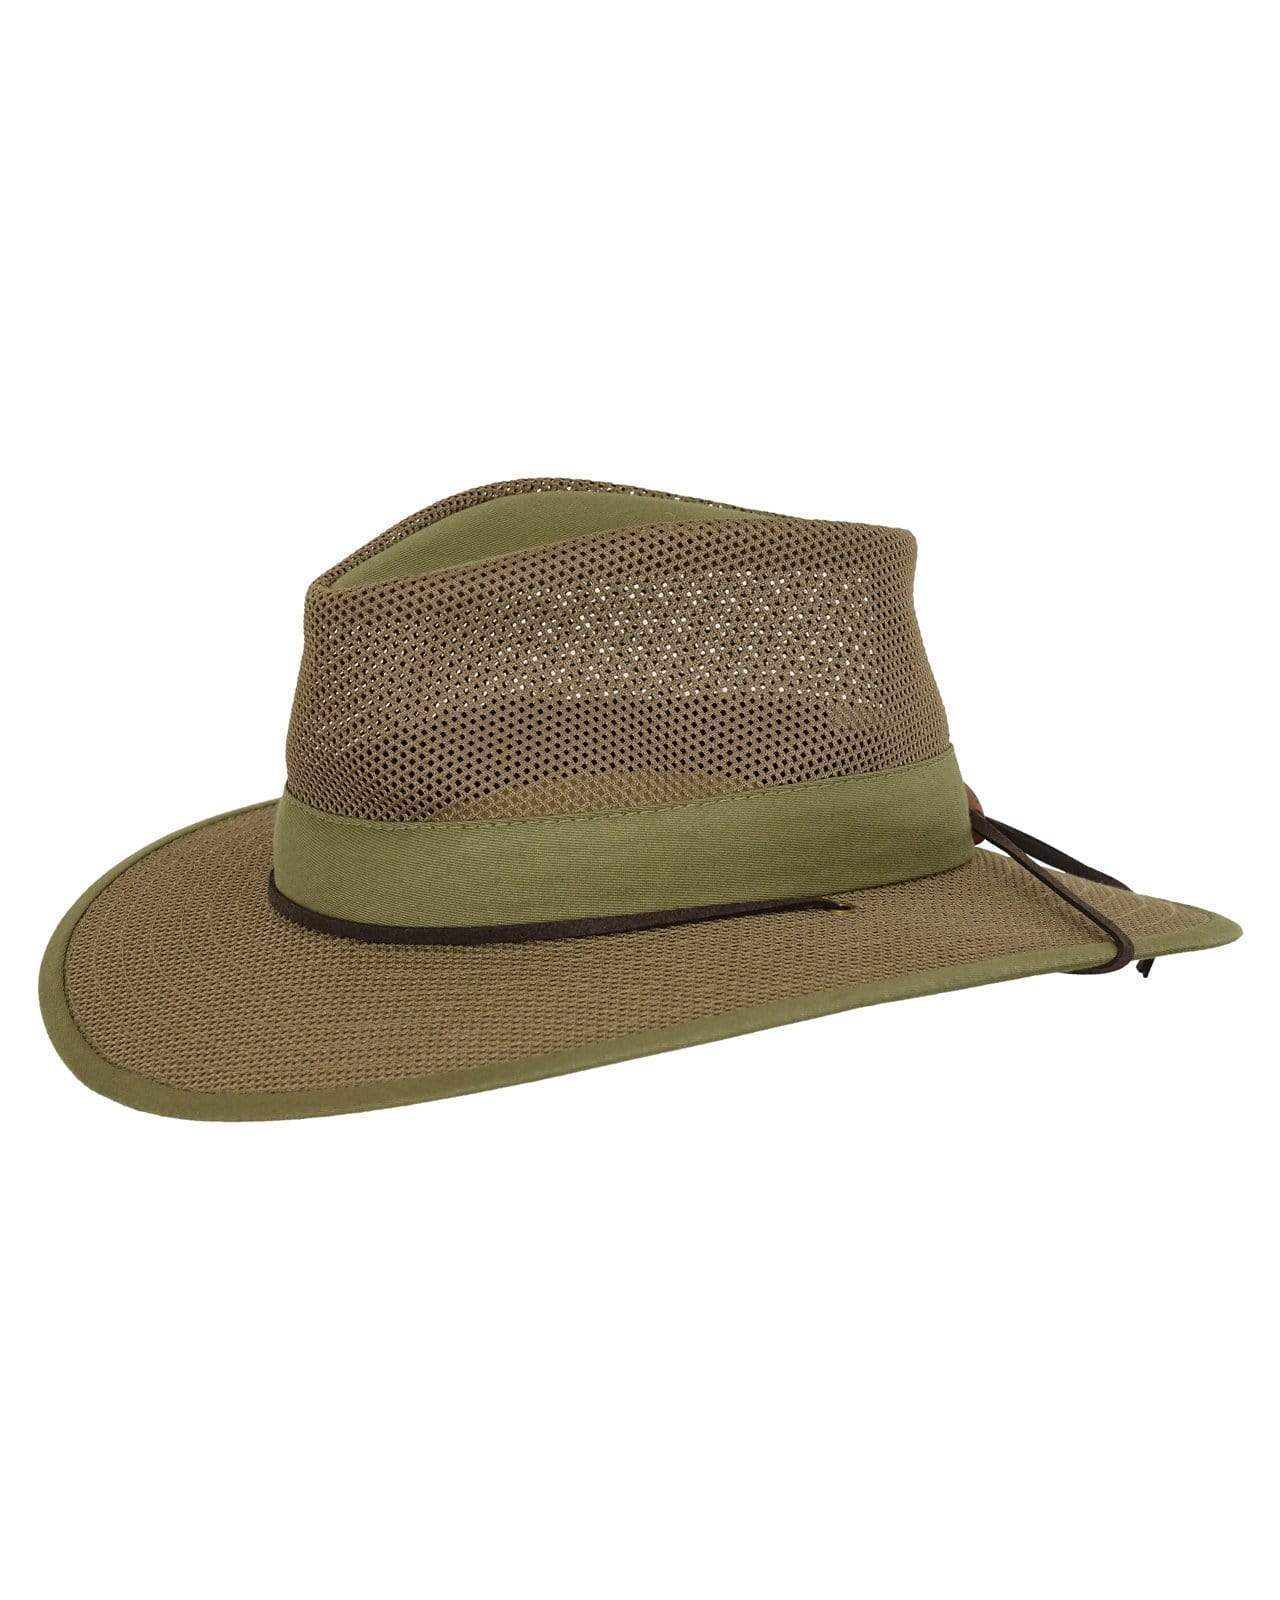 Stirling Creek  Outdoor Hats by Outback Trading Company